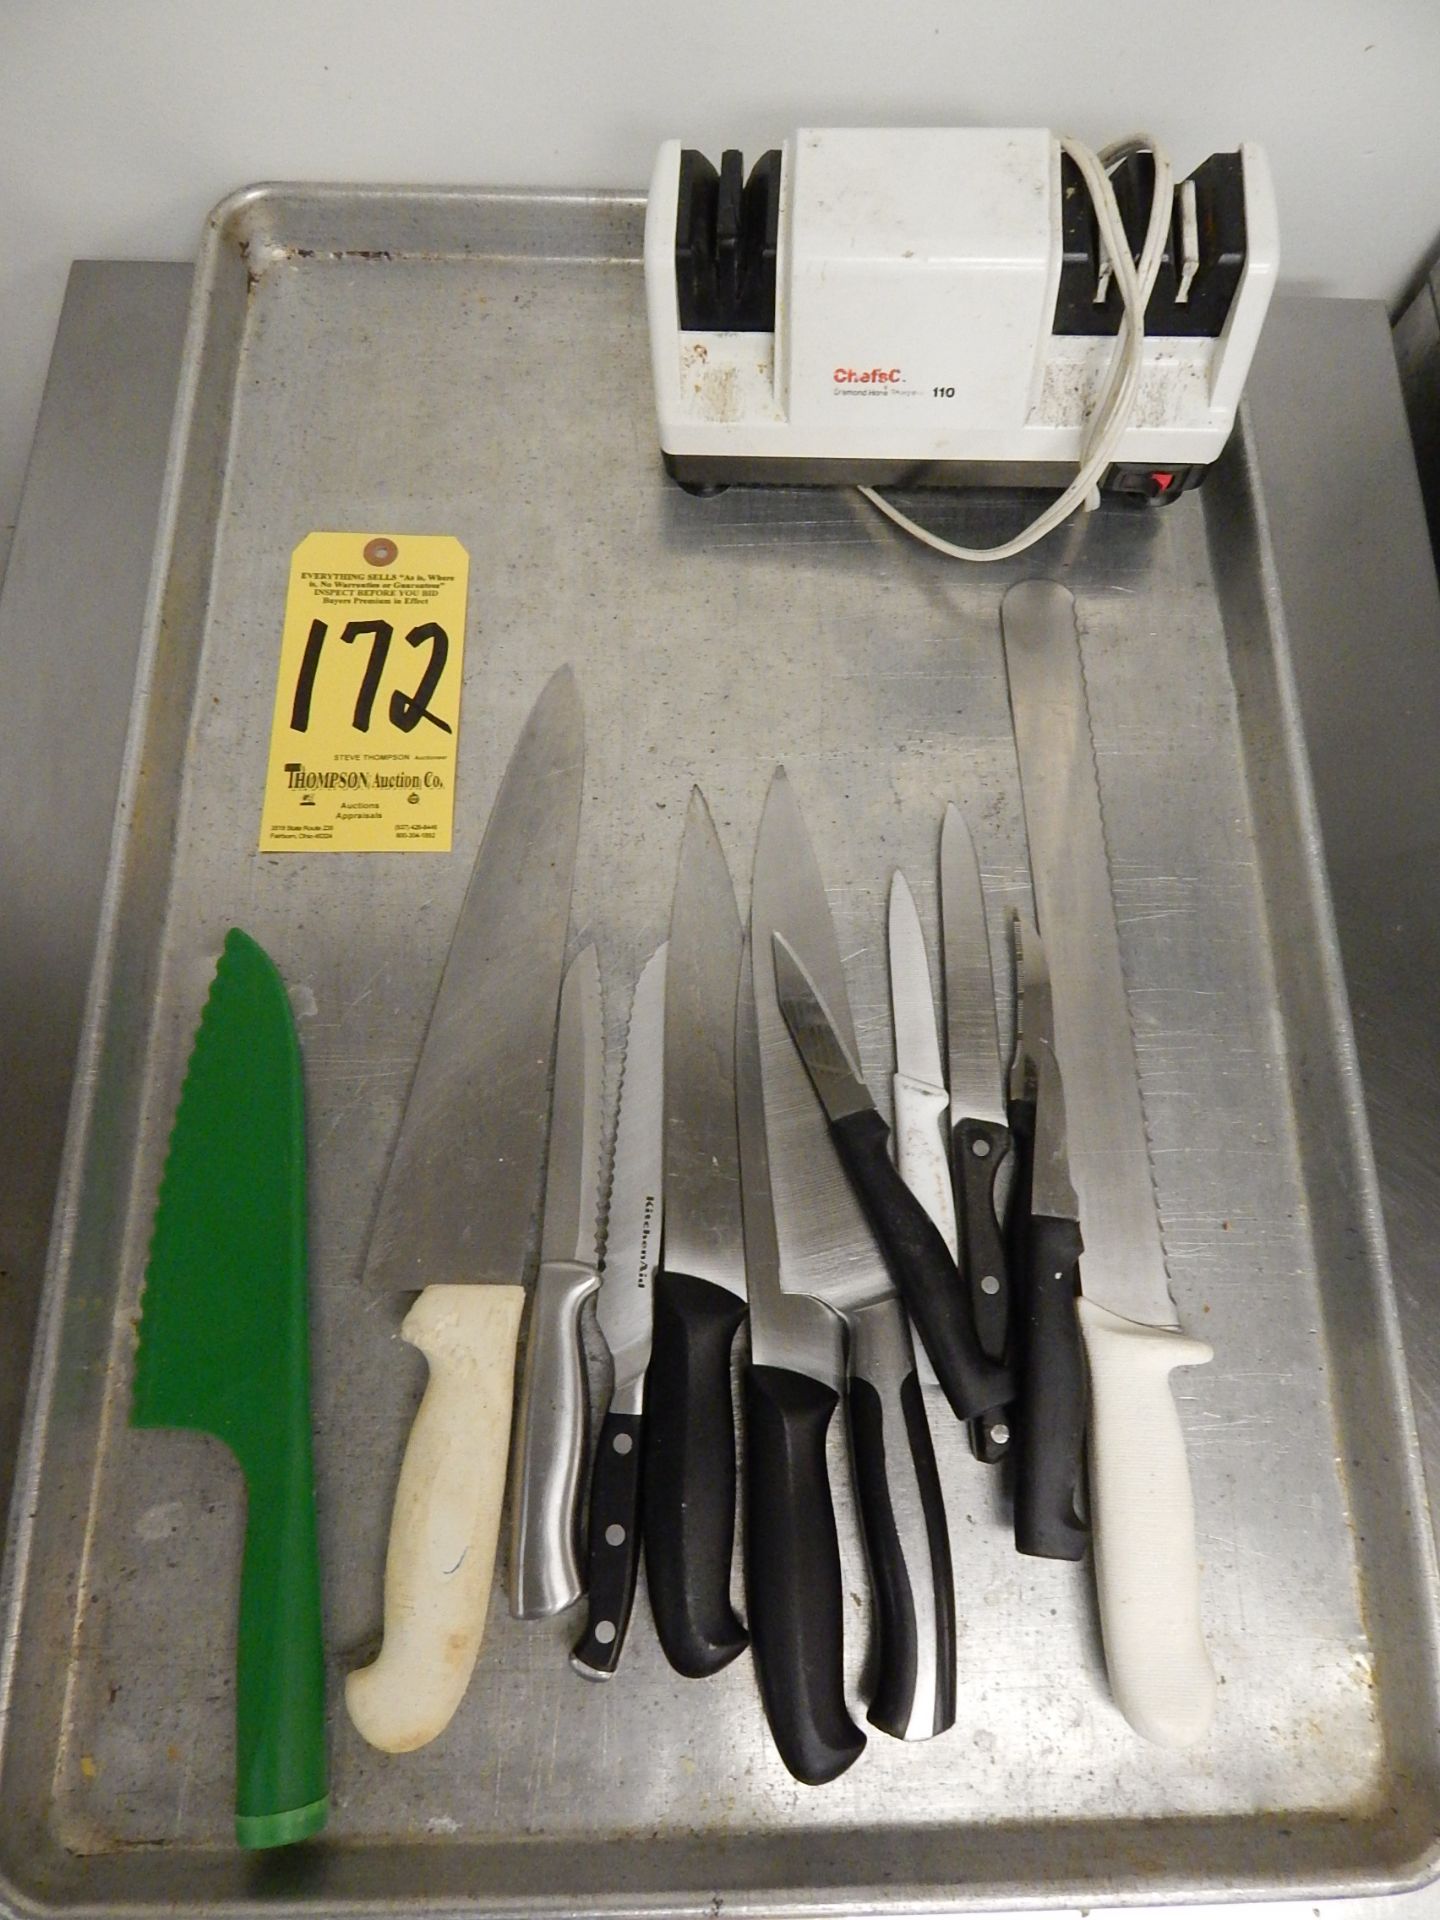 Tray with Knives and Knife Sharpener